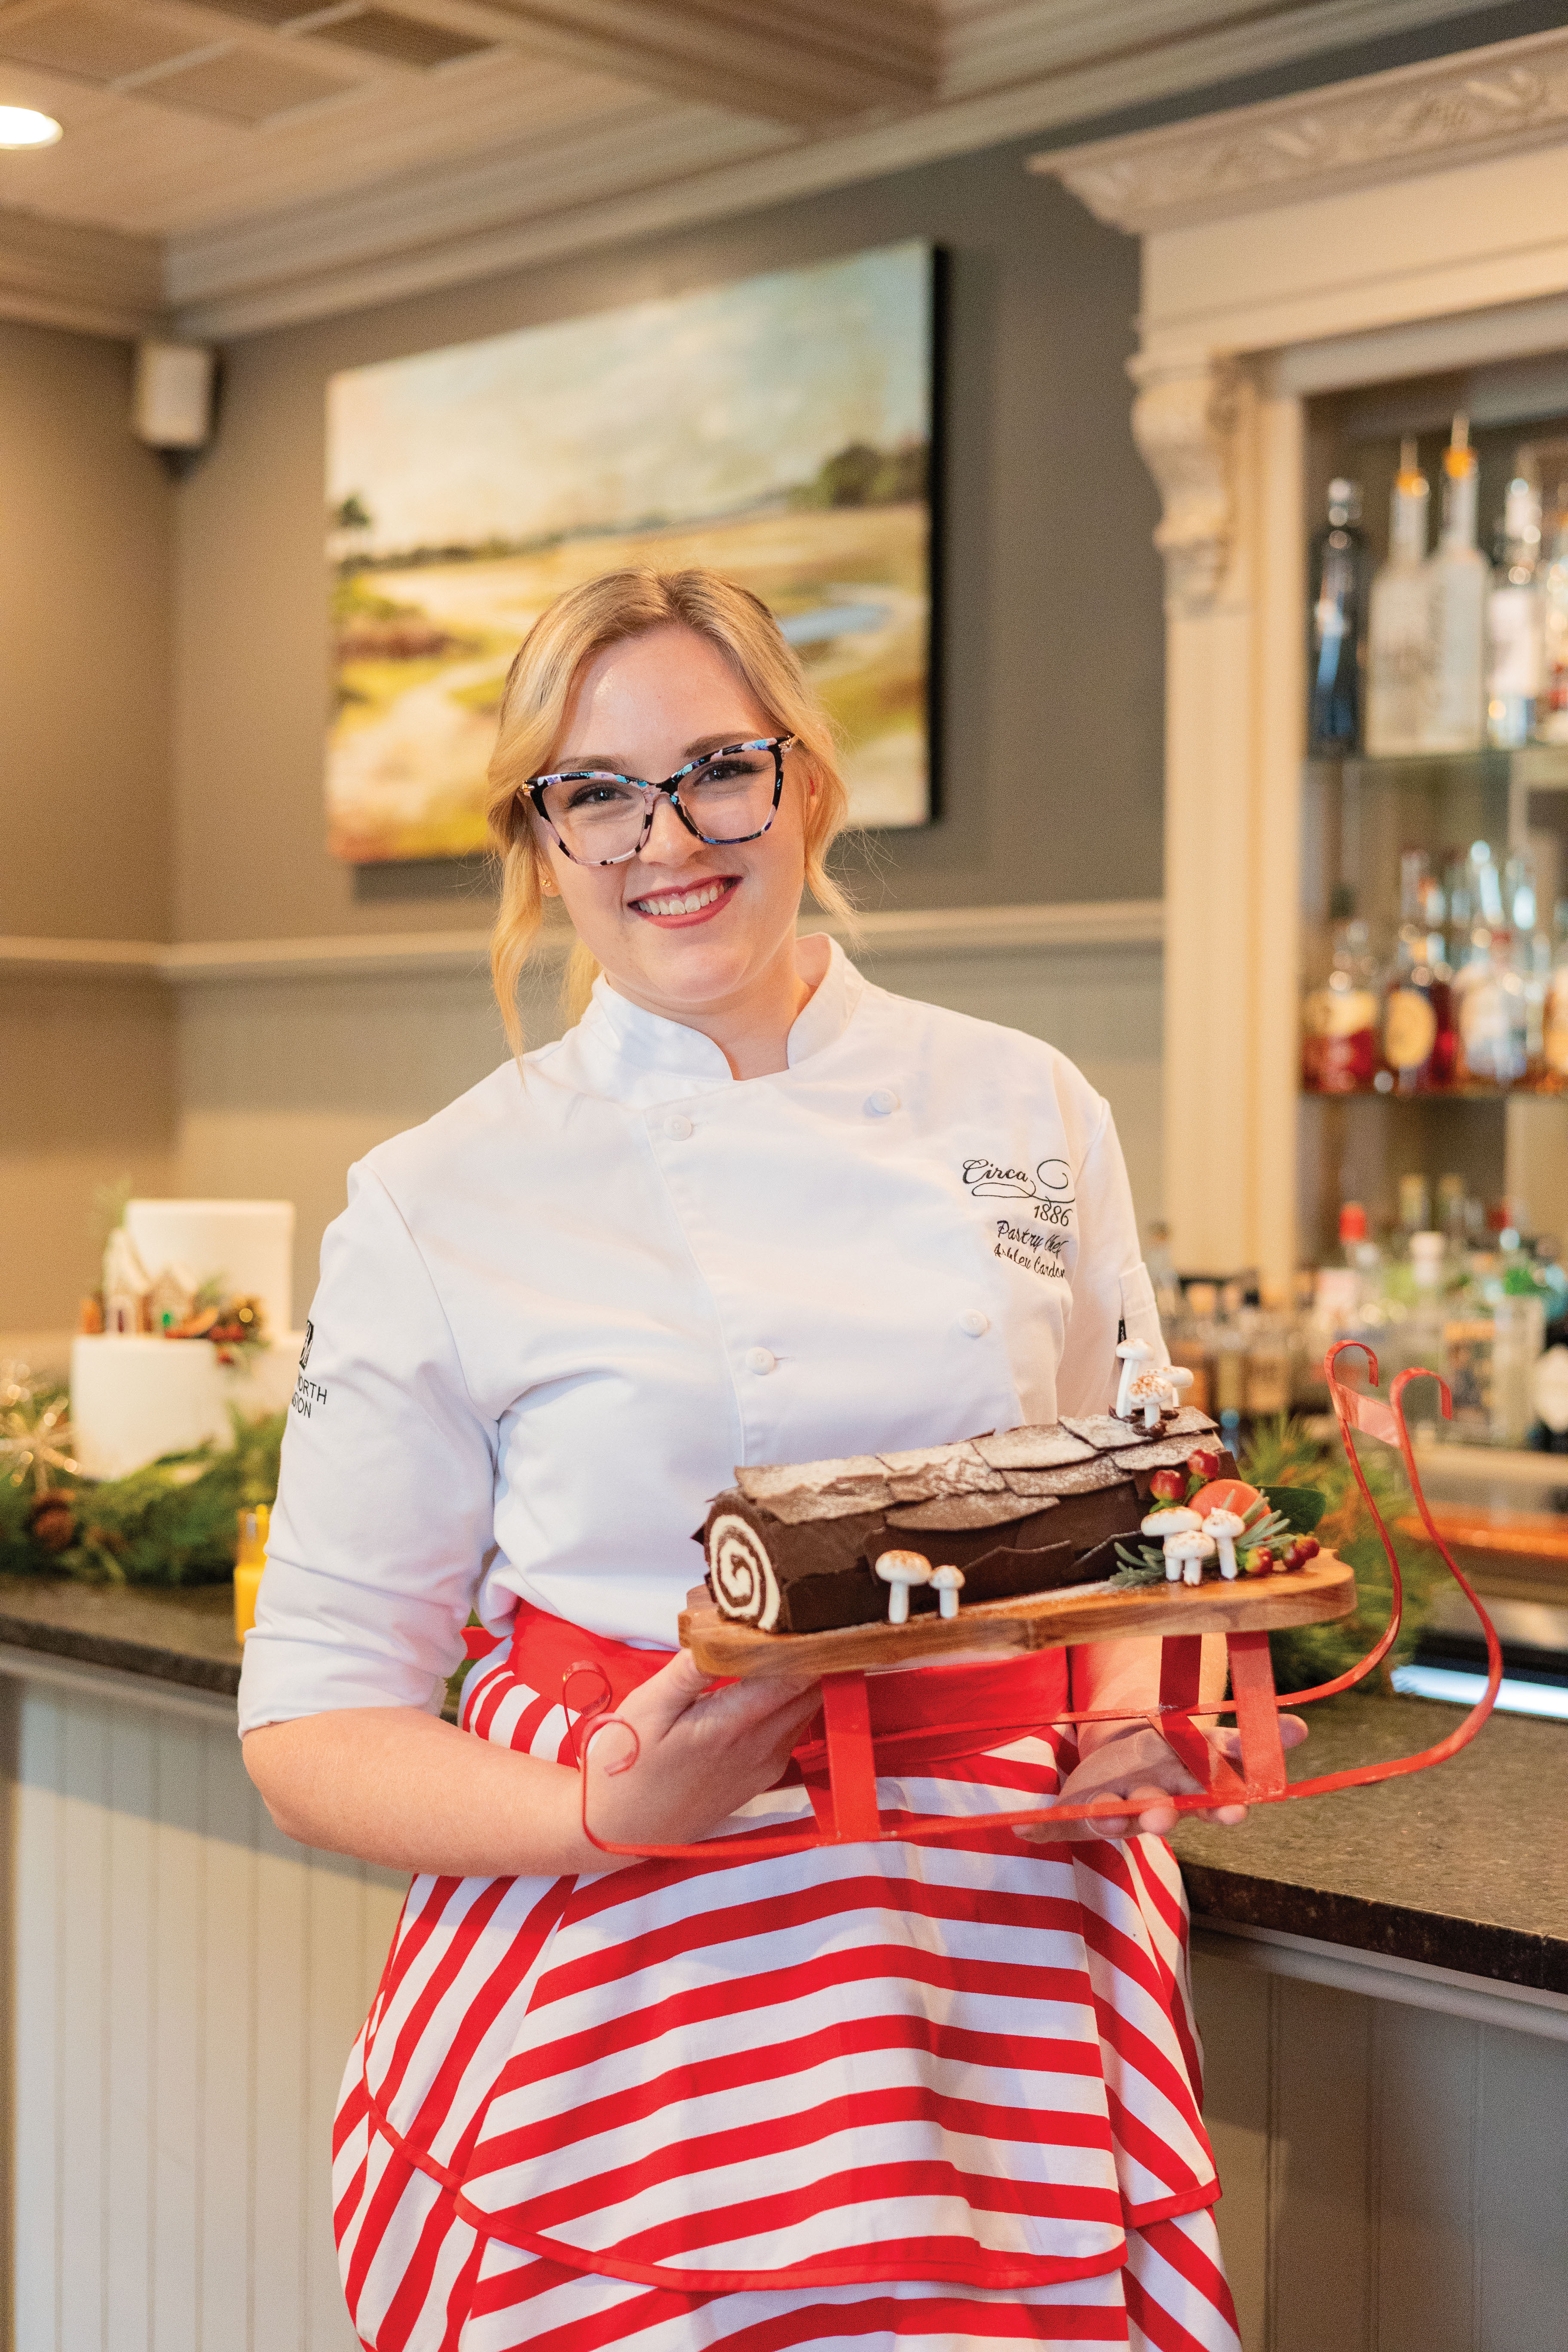 Ashley Cardona oversees pastry production for boutique hotel group Charming Inns, which includes the John Rutledge House Inn, the Wentworth Mansion, and fine dining restaurant Circa 1886.